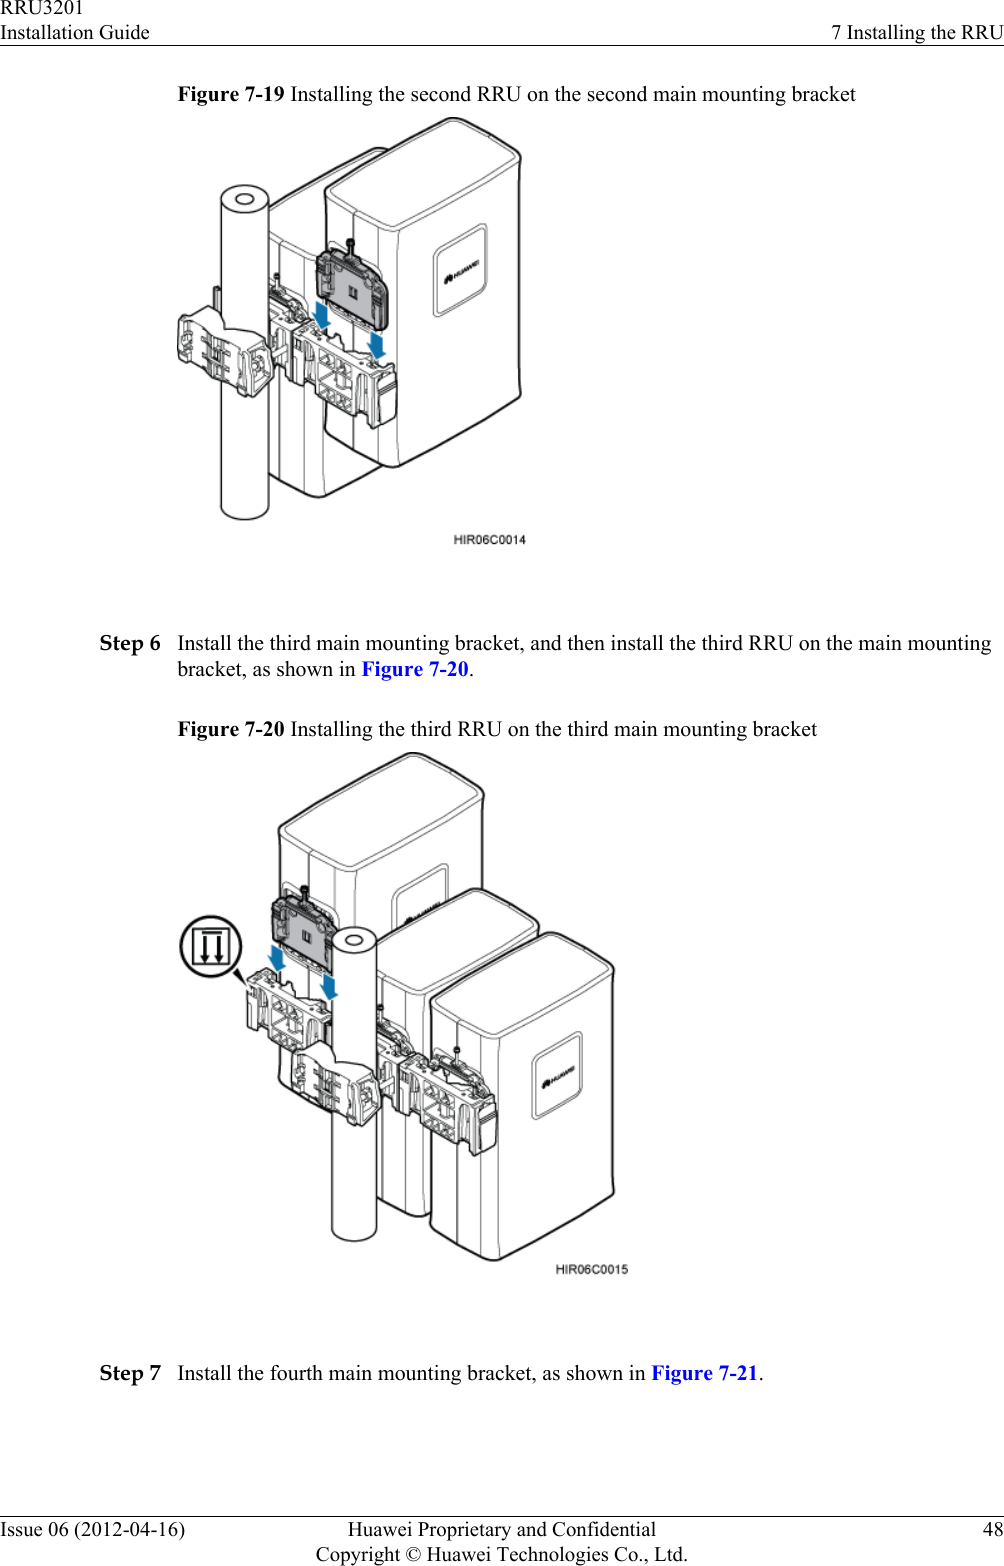 Figure 7-19 Installing the second RRU on the second main mounting bracket Step 6 Install the third main mounting bracket, and then install the third RRU on the main mountingbracket, as shown in Figure 7-20.Figure 7-20 Installing the third RRU on the third main mounting bracket Step 7 Install the fourth main mounting bracket, as shown in Figure 7-21.RRU3201Installation Guide 7 Installing the RRUIssue 06 (2012-04-16) Huawei Proprietary and ConfidentialCopyright © Huawei Technologies Co., Ltd.48